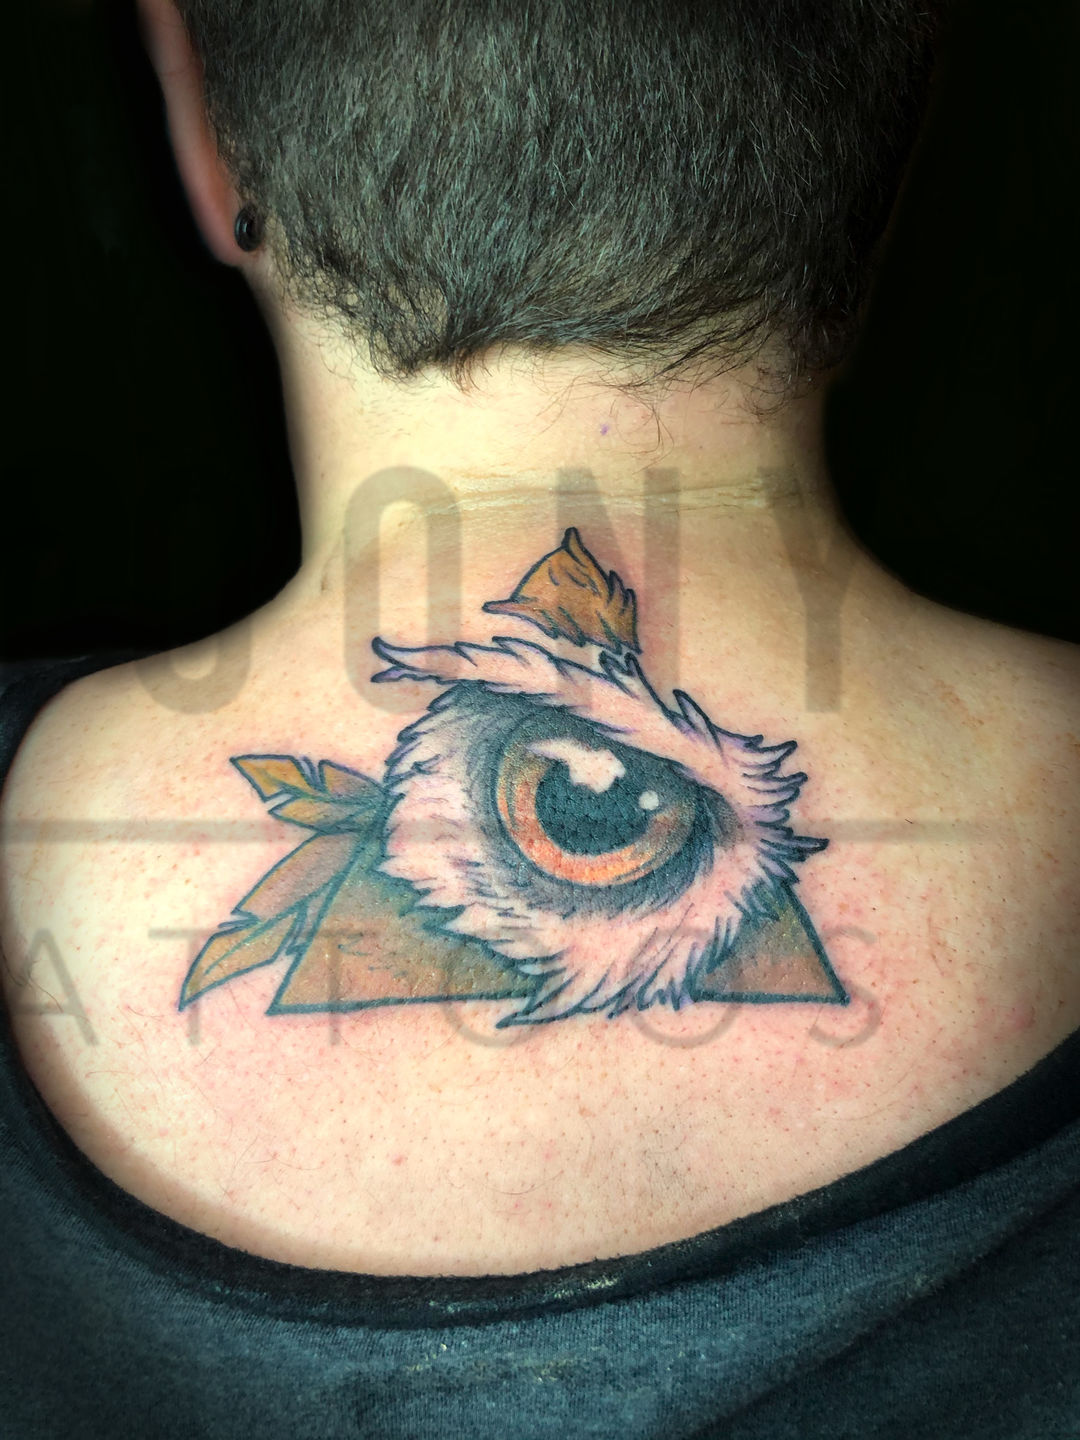 Abstract Eye Color tattoo in nepal | Sumina Shrestha | Suminu Tattoo in  Nepal - Tattoo artist in Nepal